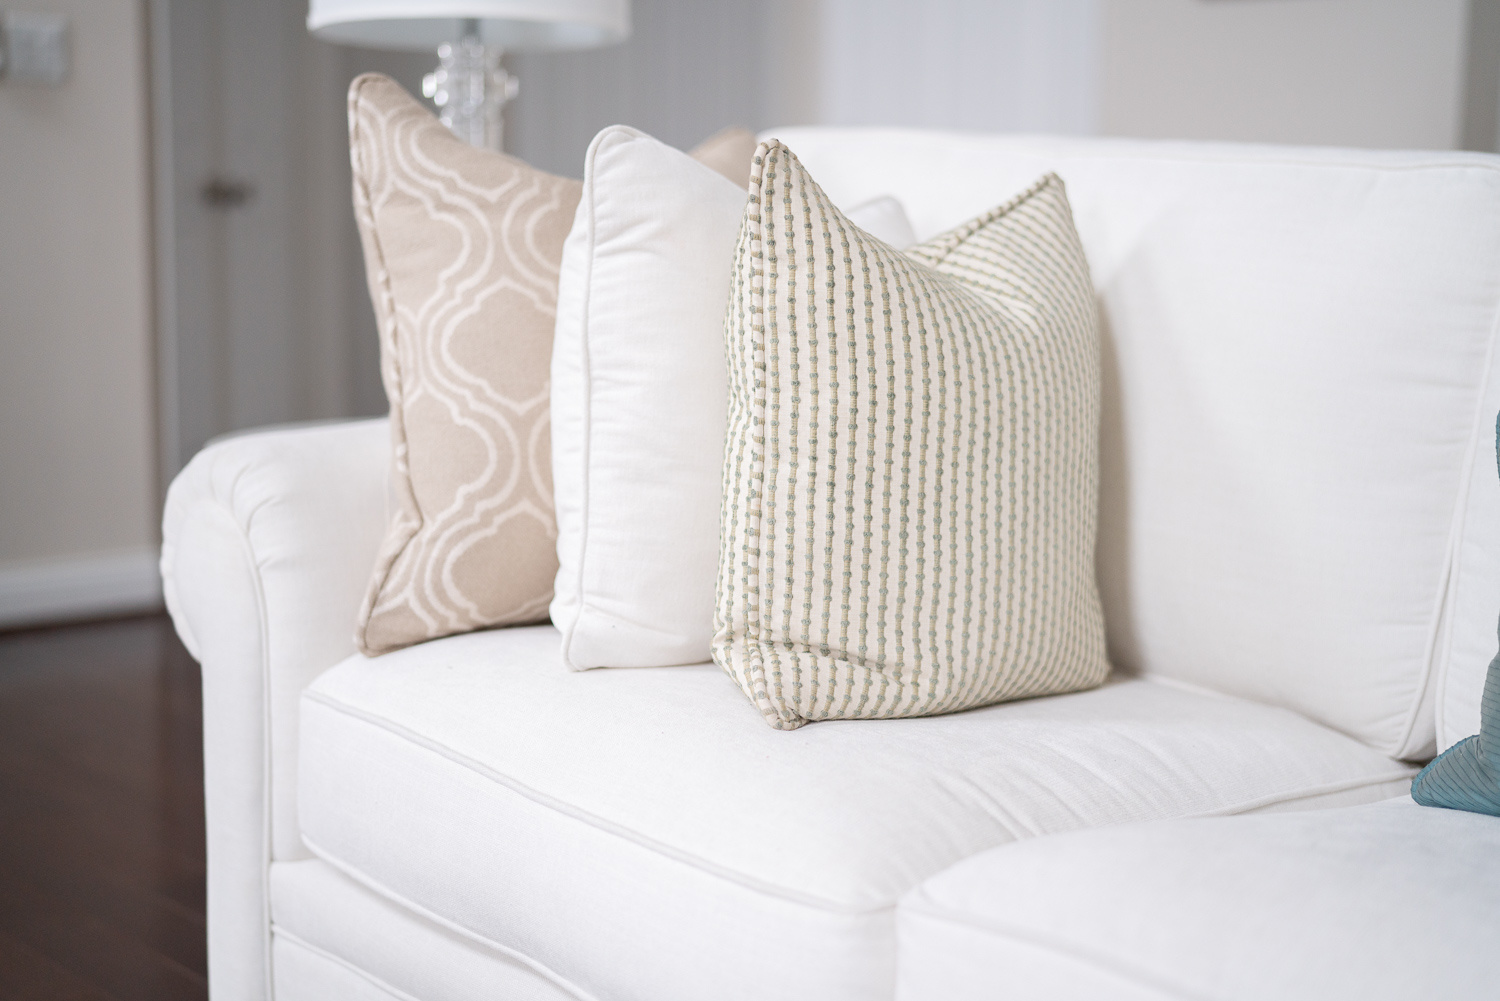 Neutral-themed pillowcases made from decorative rugs on a white sofa